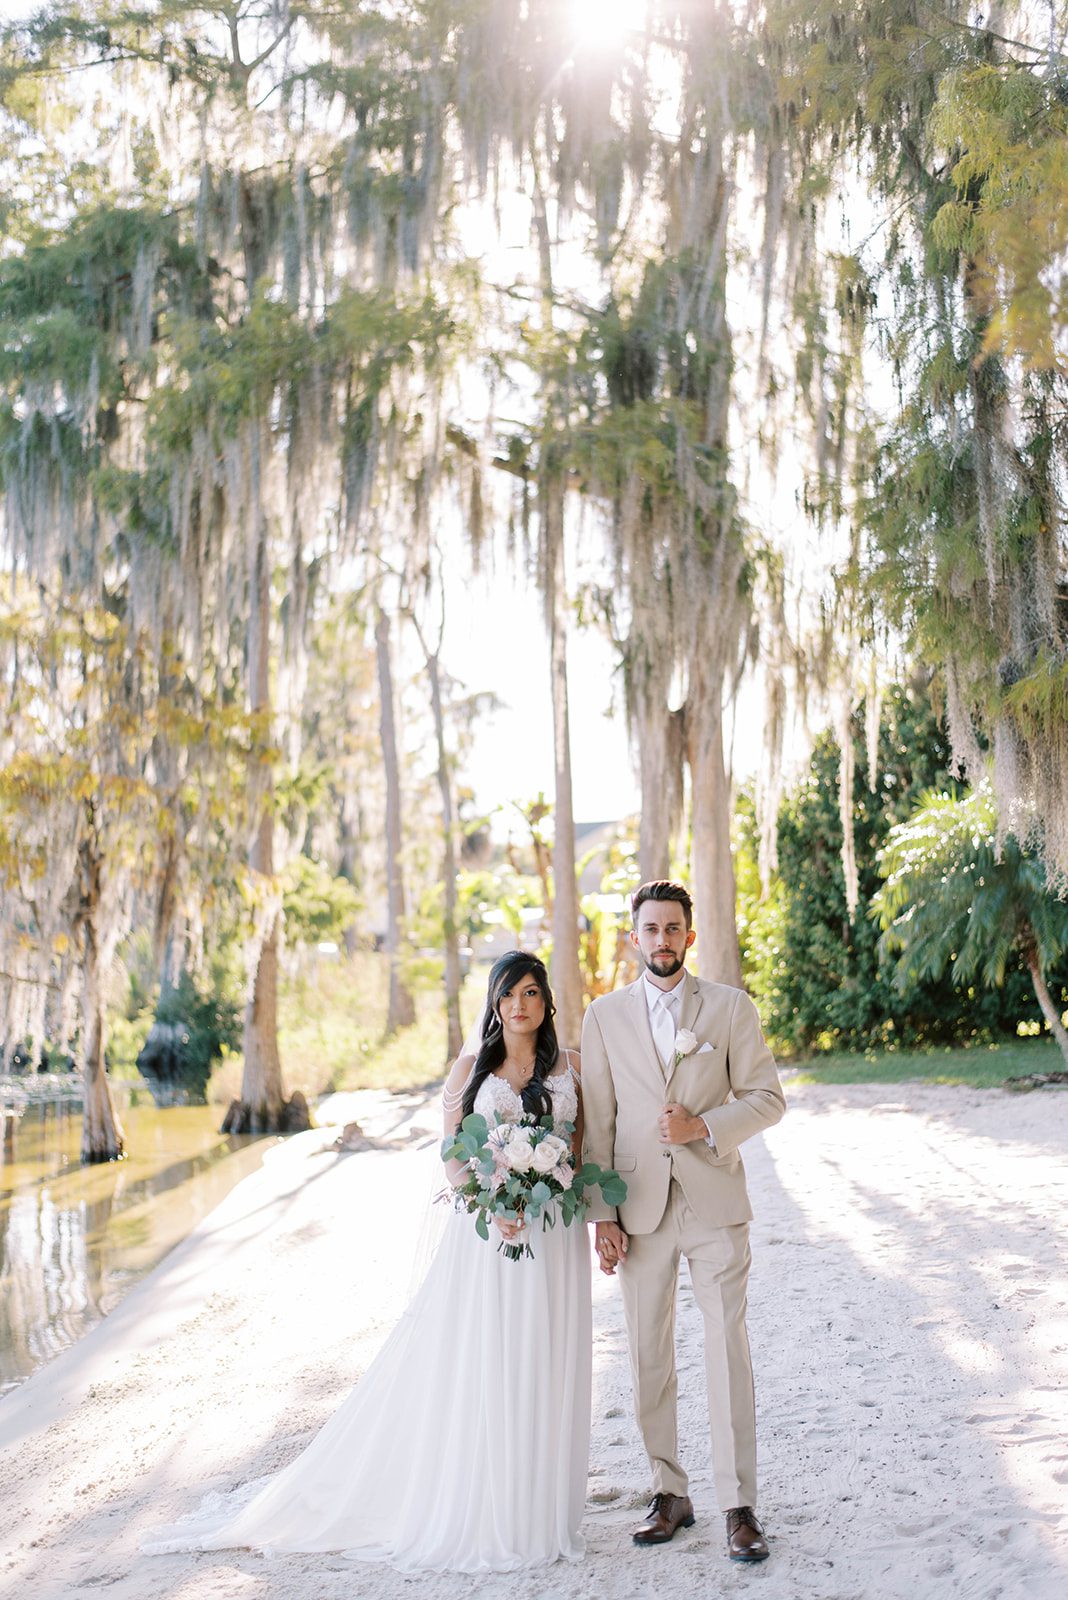 bride and groom standing together and holding hands on their wedding day with bride holding a white florals bouquet and the groom holding his suit coat for a very regal wedding portrait, Wedding Vendors Search Etiquette